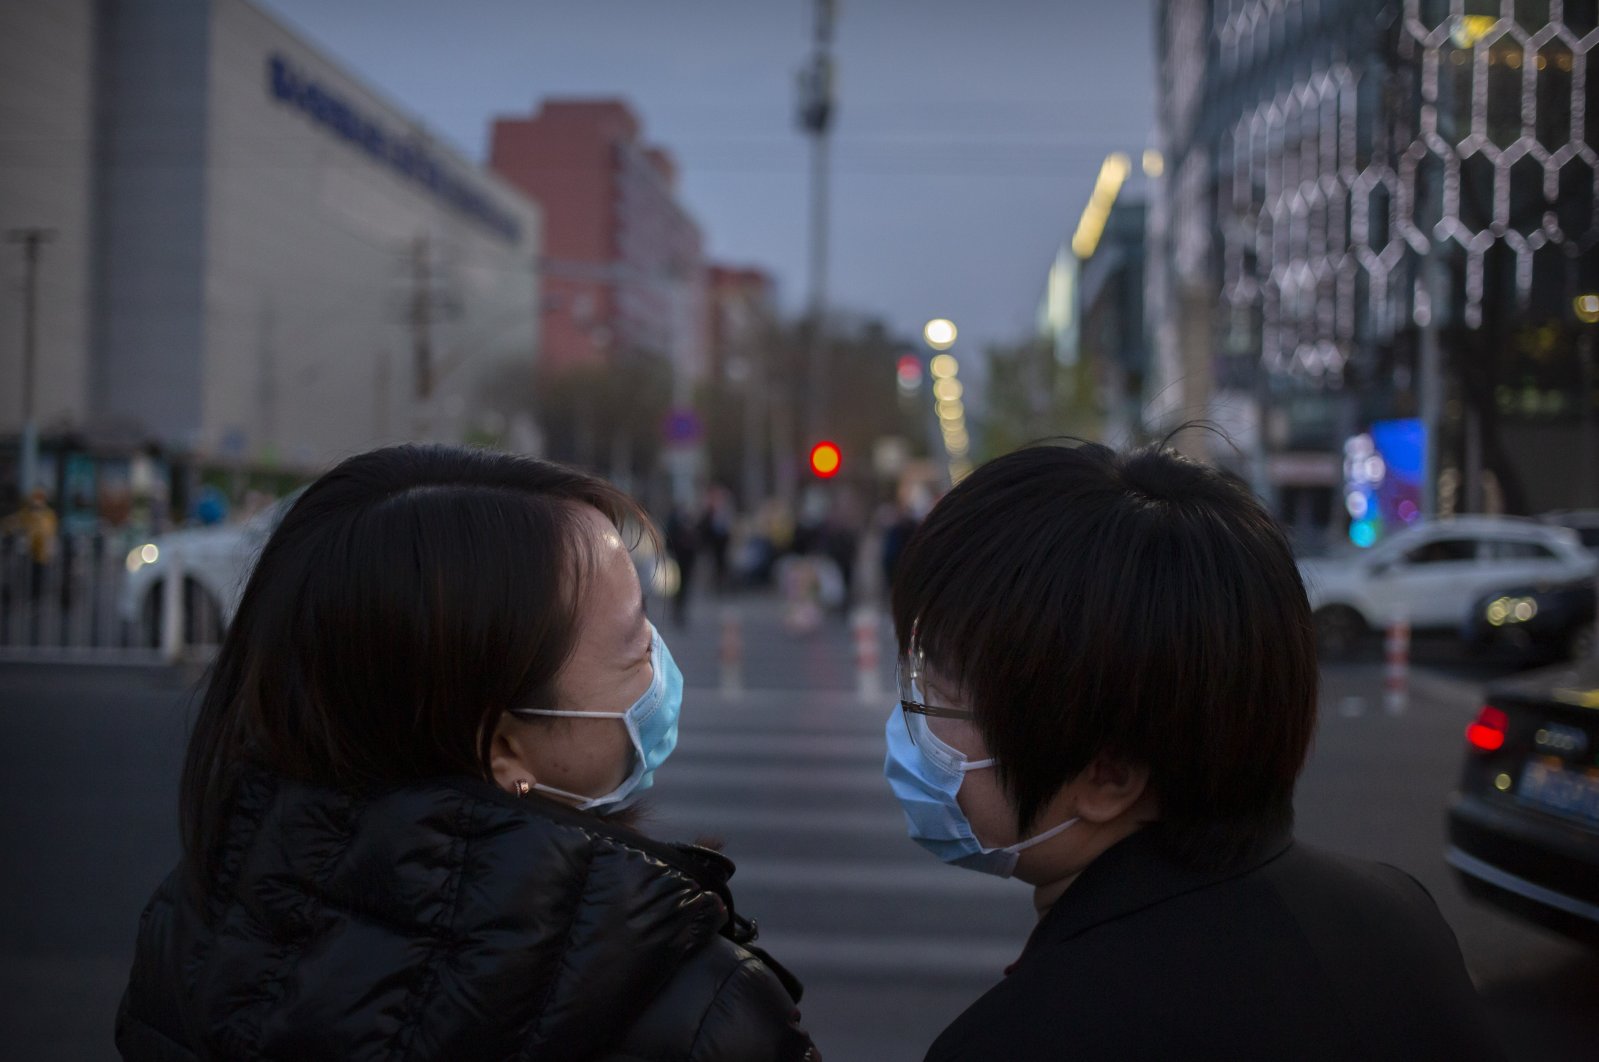 People wearing face masks to help curb the spread of the new coronavirus laugh as they cross an intersection in Beijing, Friday, April 10, 2020. (AP Photo)